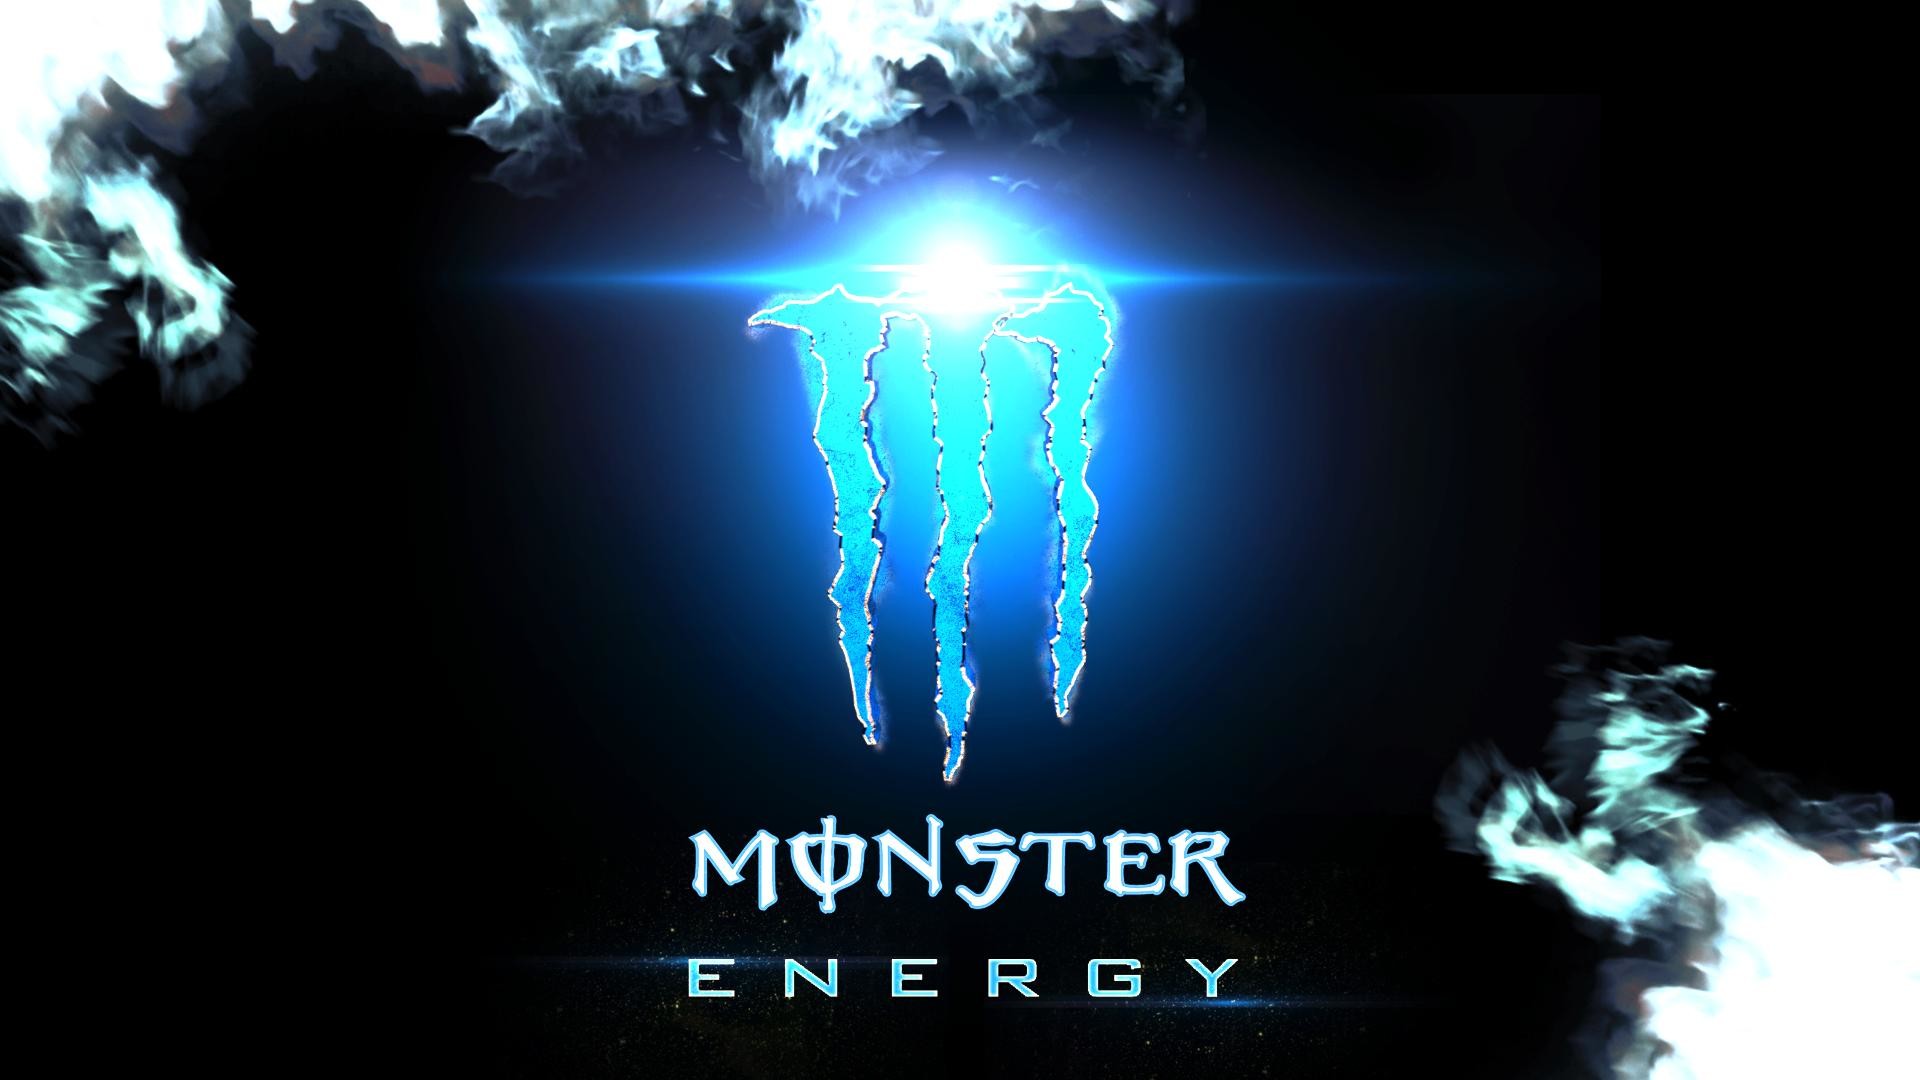 1920x1080 Excellent HD Wallpapers Collection of Monster Energy -  px - HD  Wallpapers